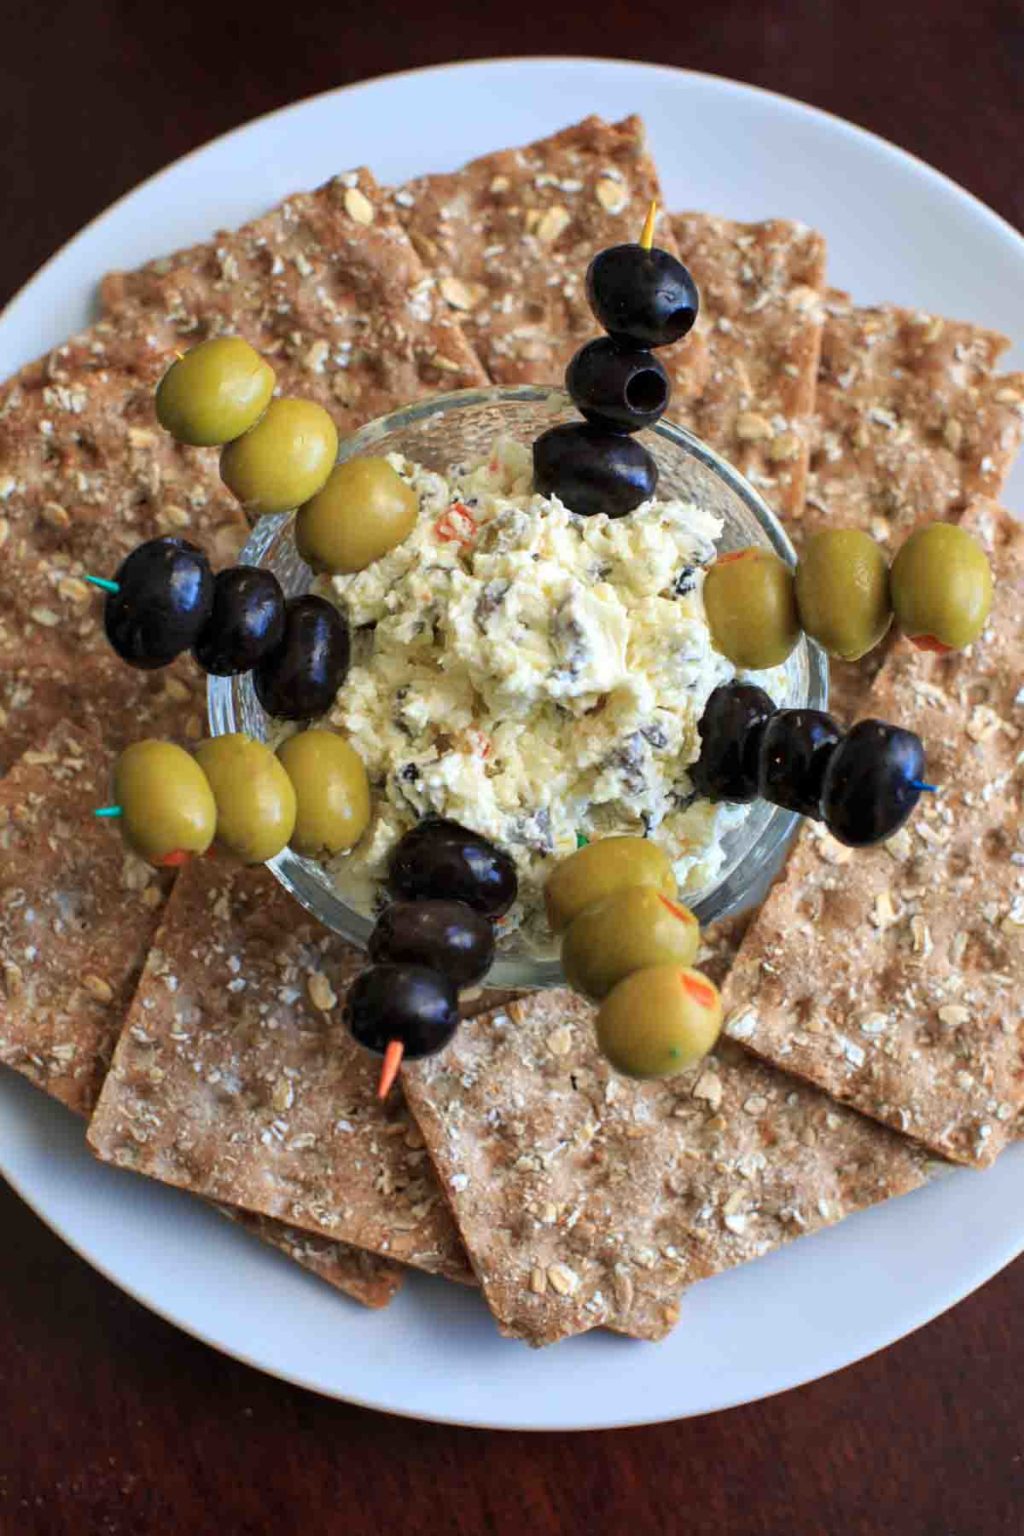 Olive goat cheese dip is a quick and simple appetizer that can be prepared ahead or on the spot. Sure to be a crowd pleaser!